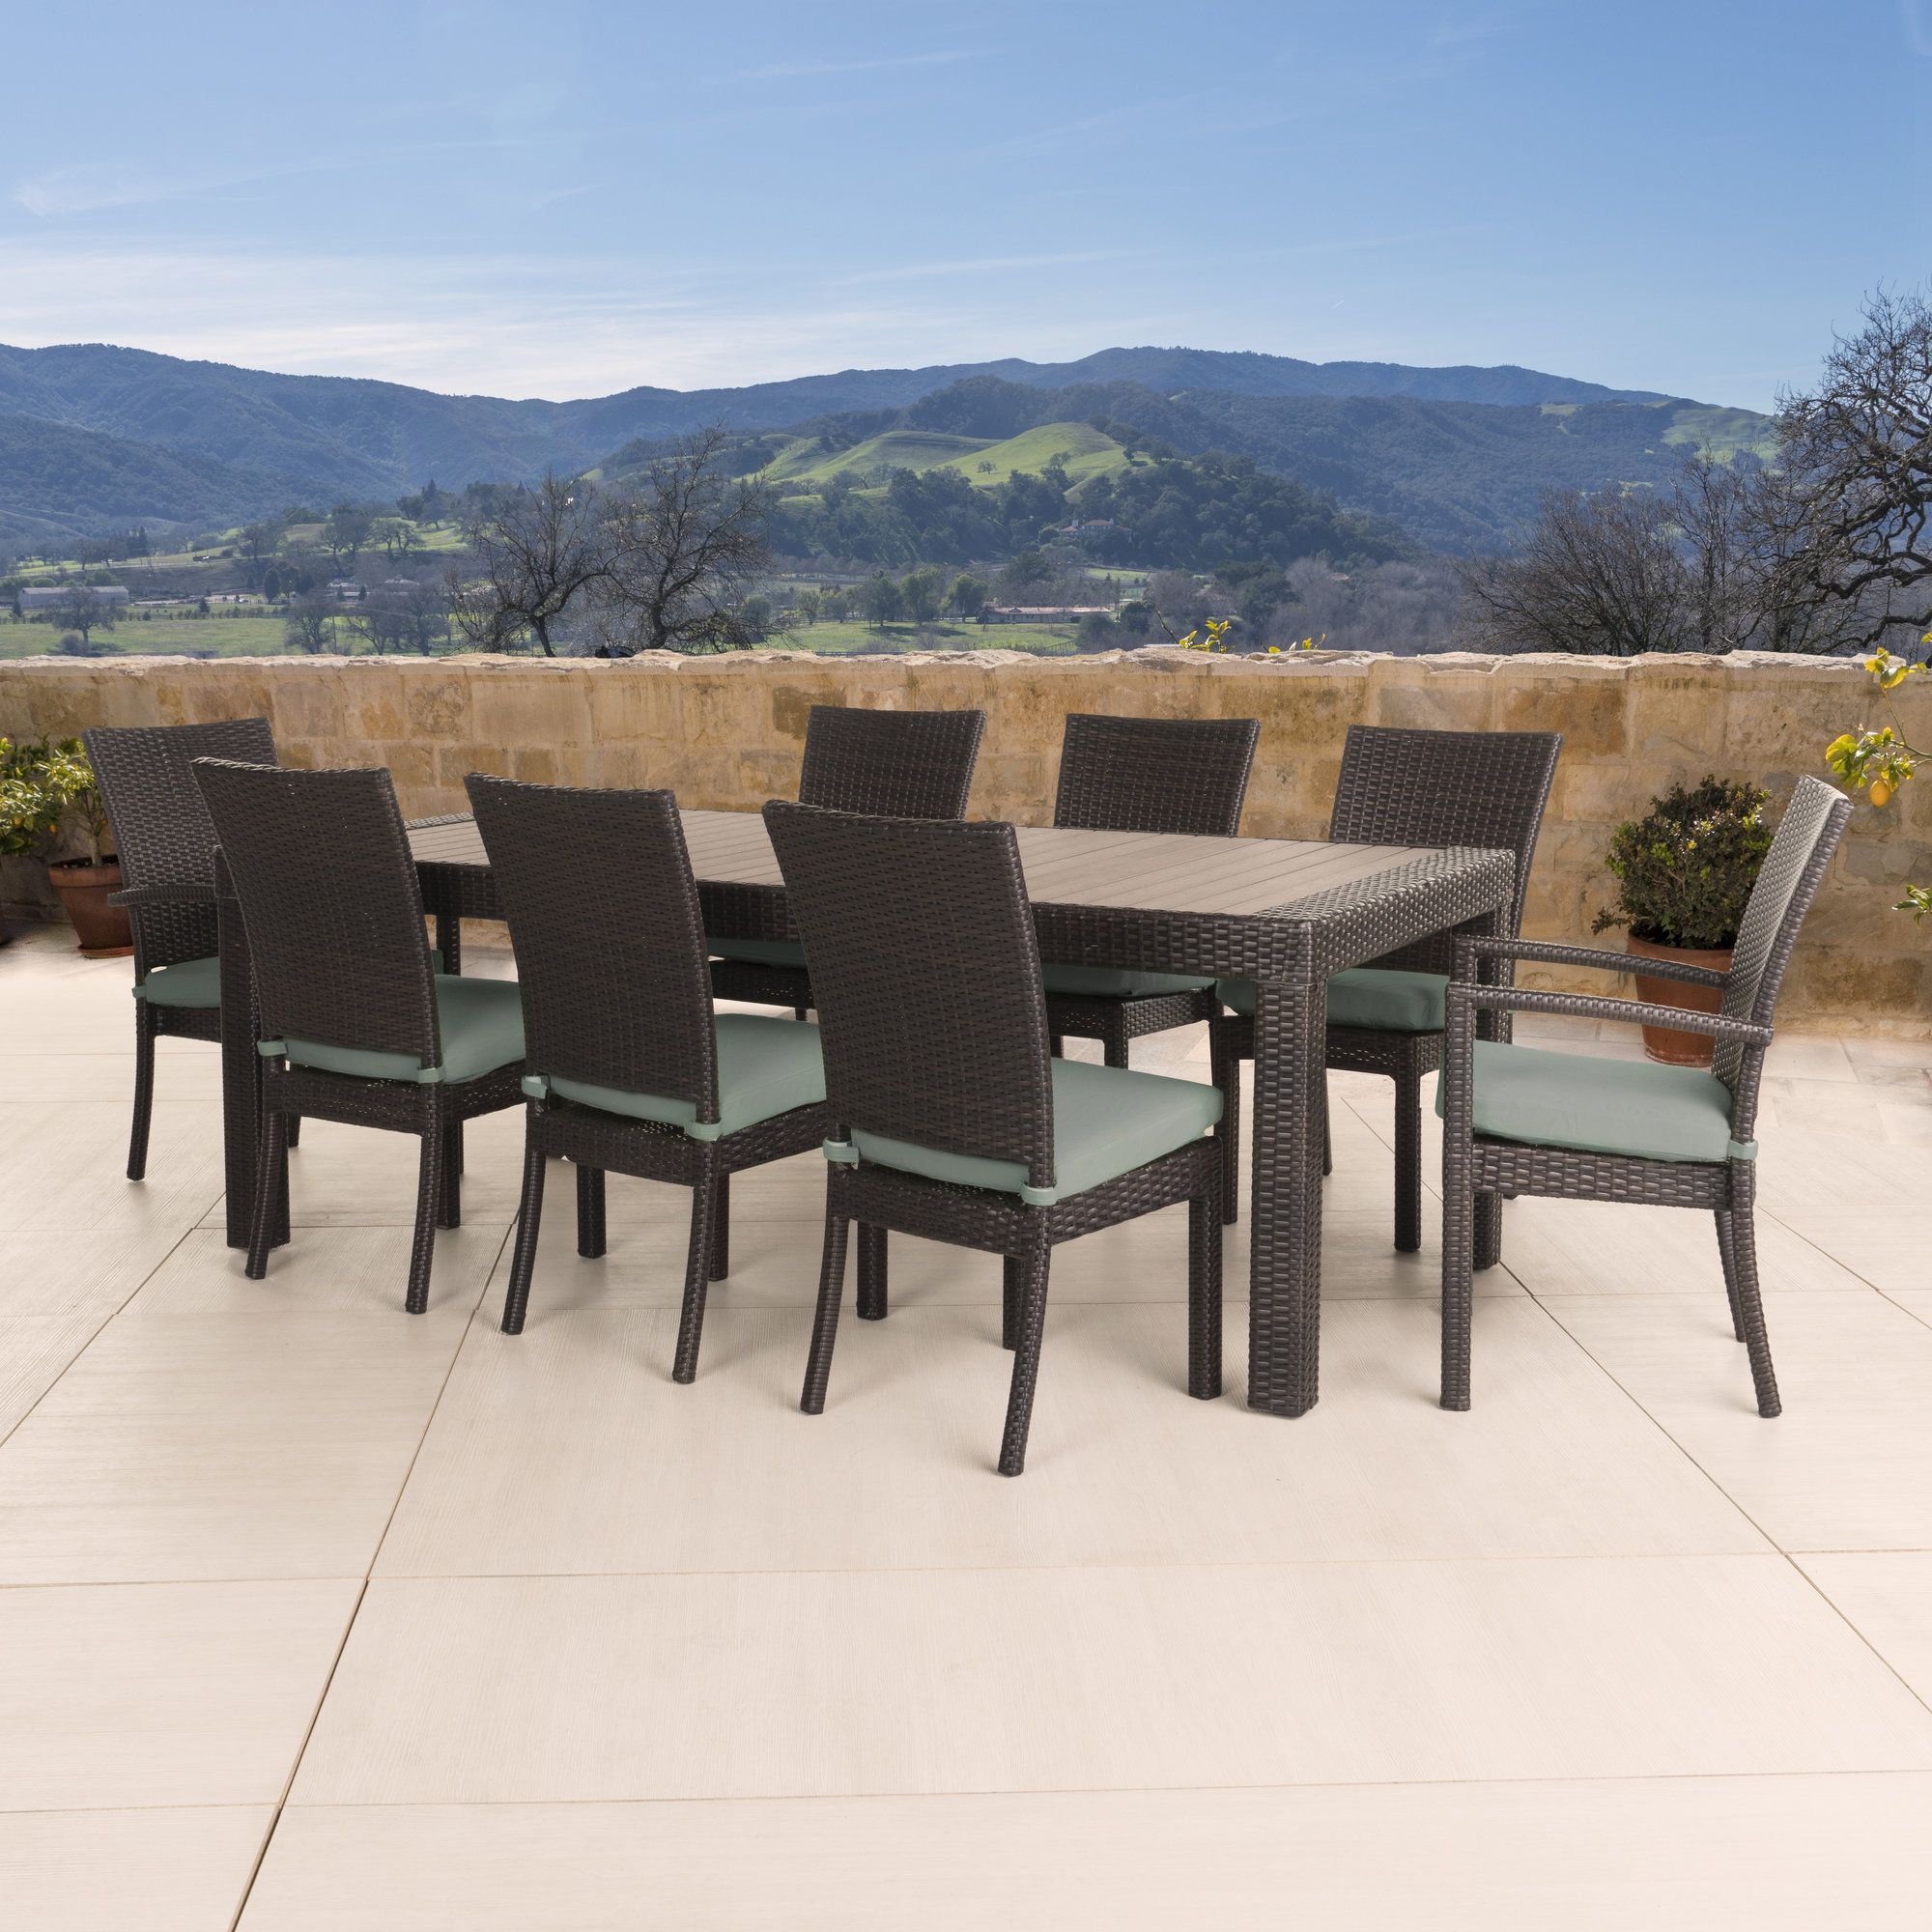 9 Piece Patio Dining Sets Regarding Most Popular 9 Piece Laurie Patio Dining Set In Espresso – Decorafit/home (View 2 of 15)